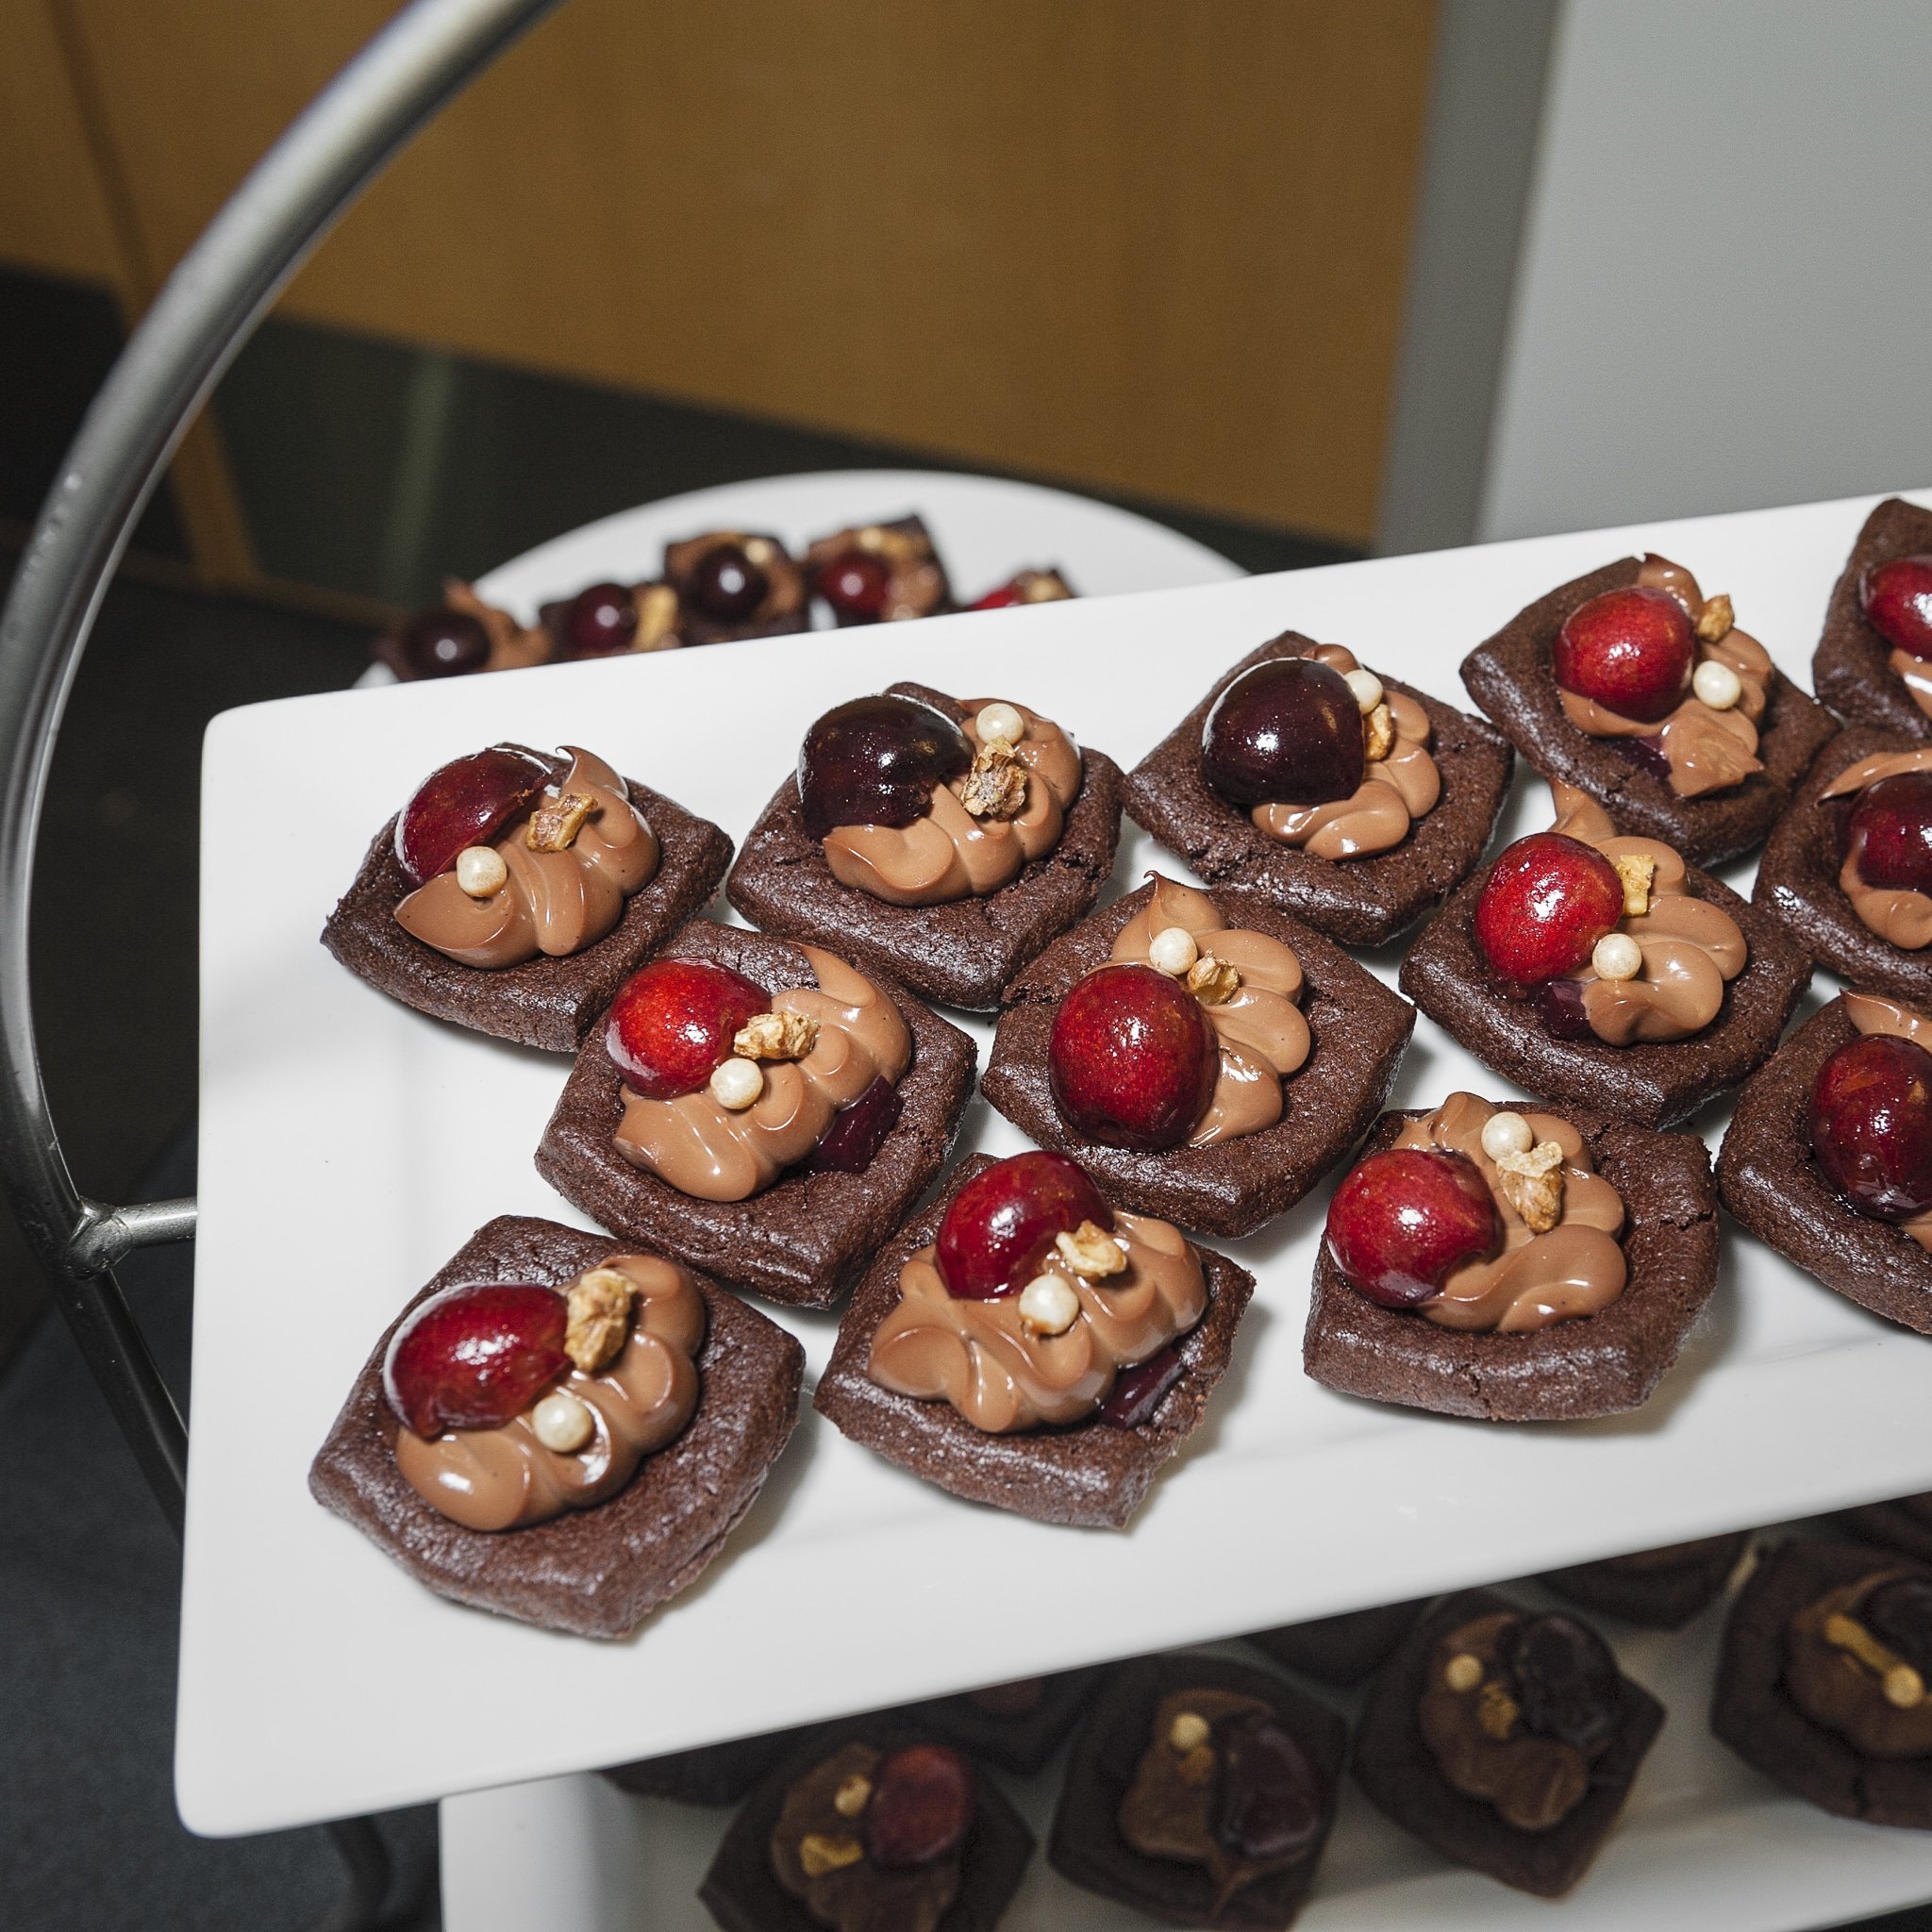 Chocolate sweets topped with cherries from Les Madeleine.